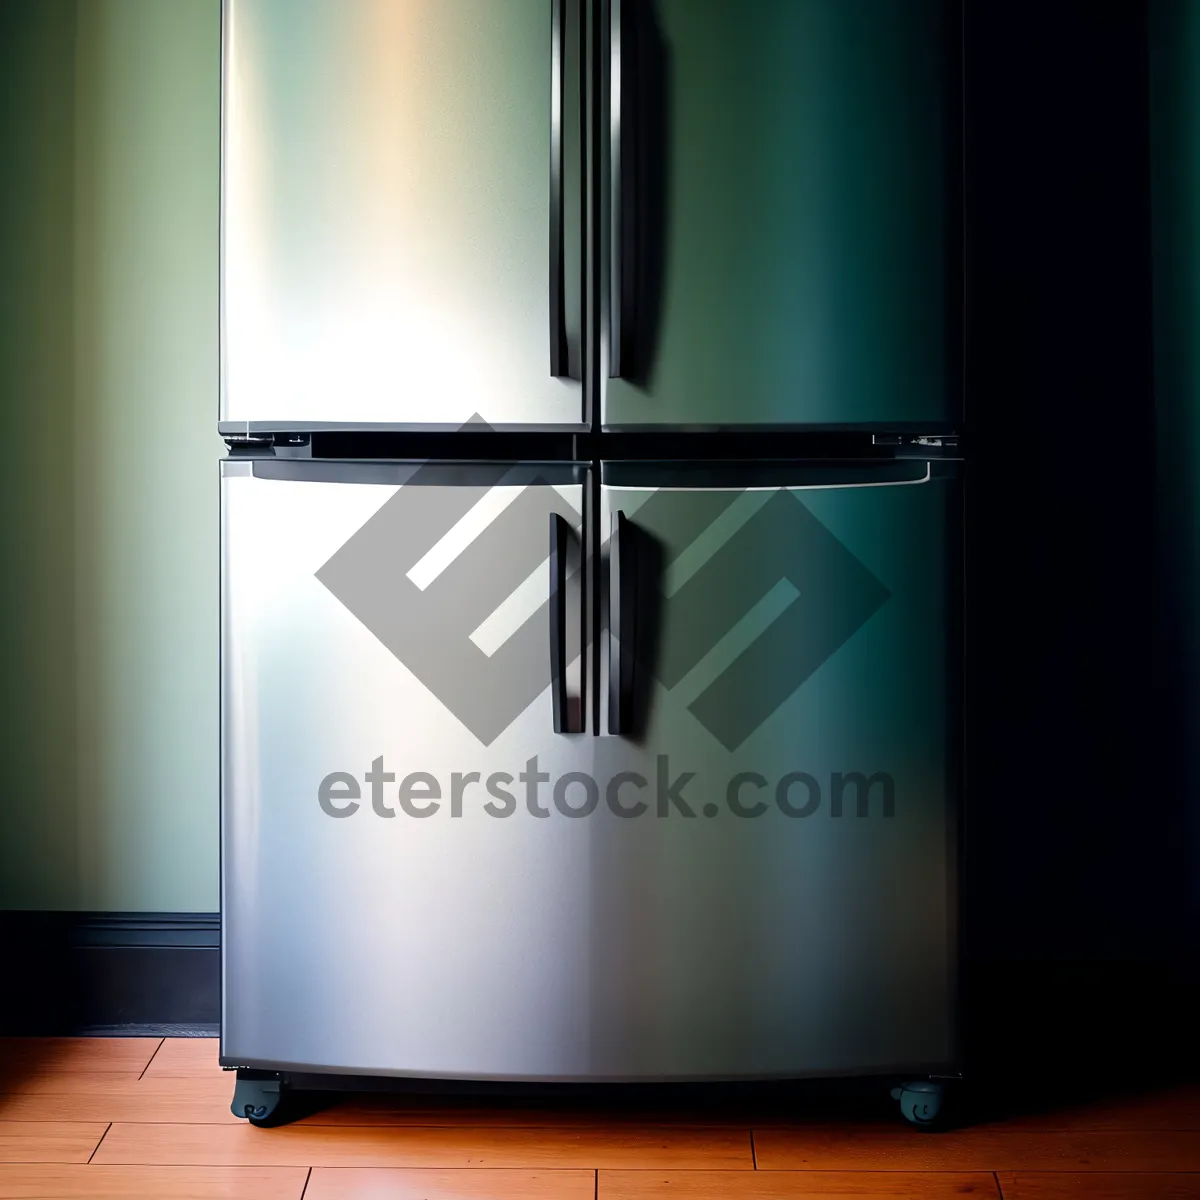 Picture of White Goods - Modern Refrigerator for Home Interior